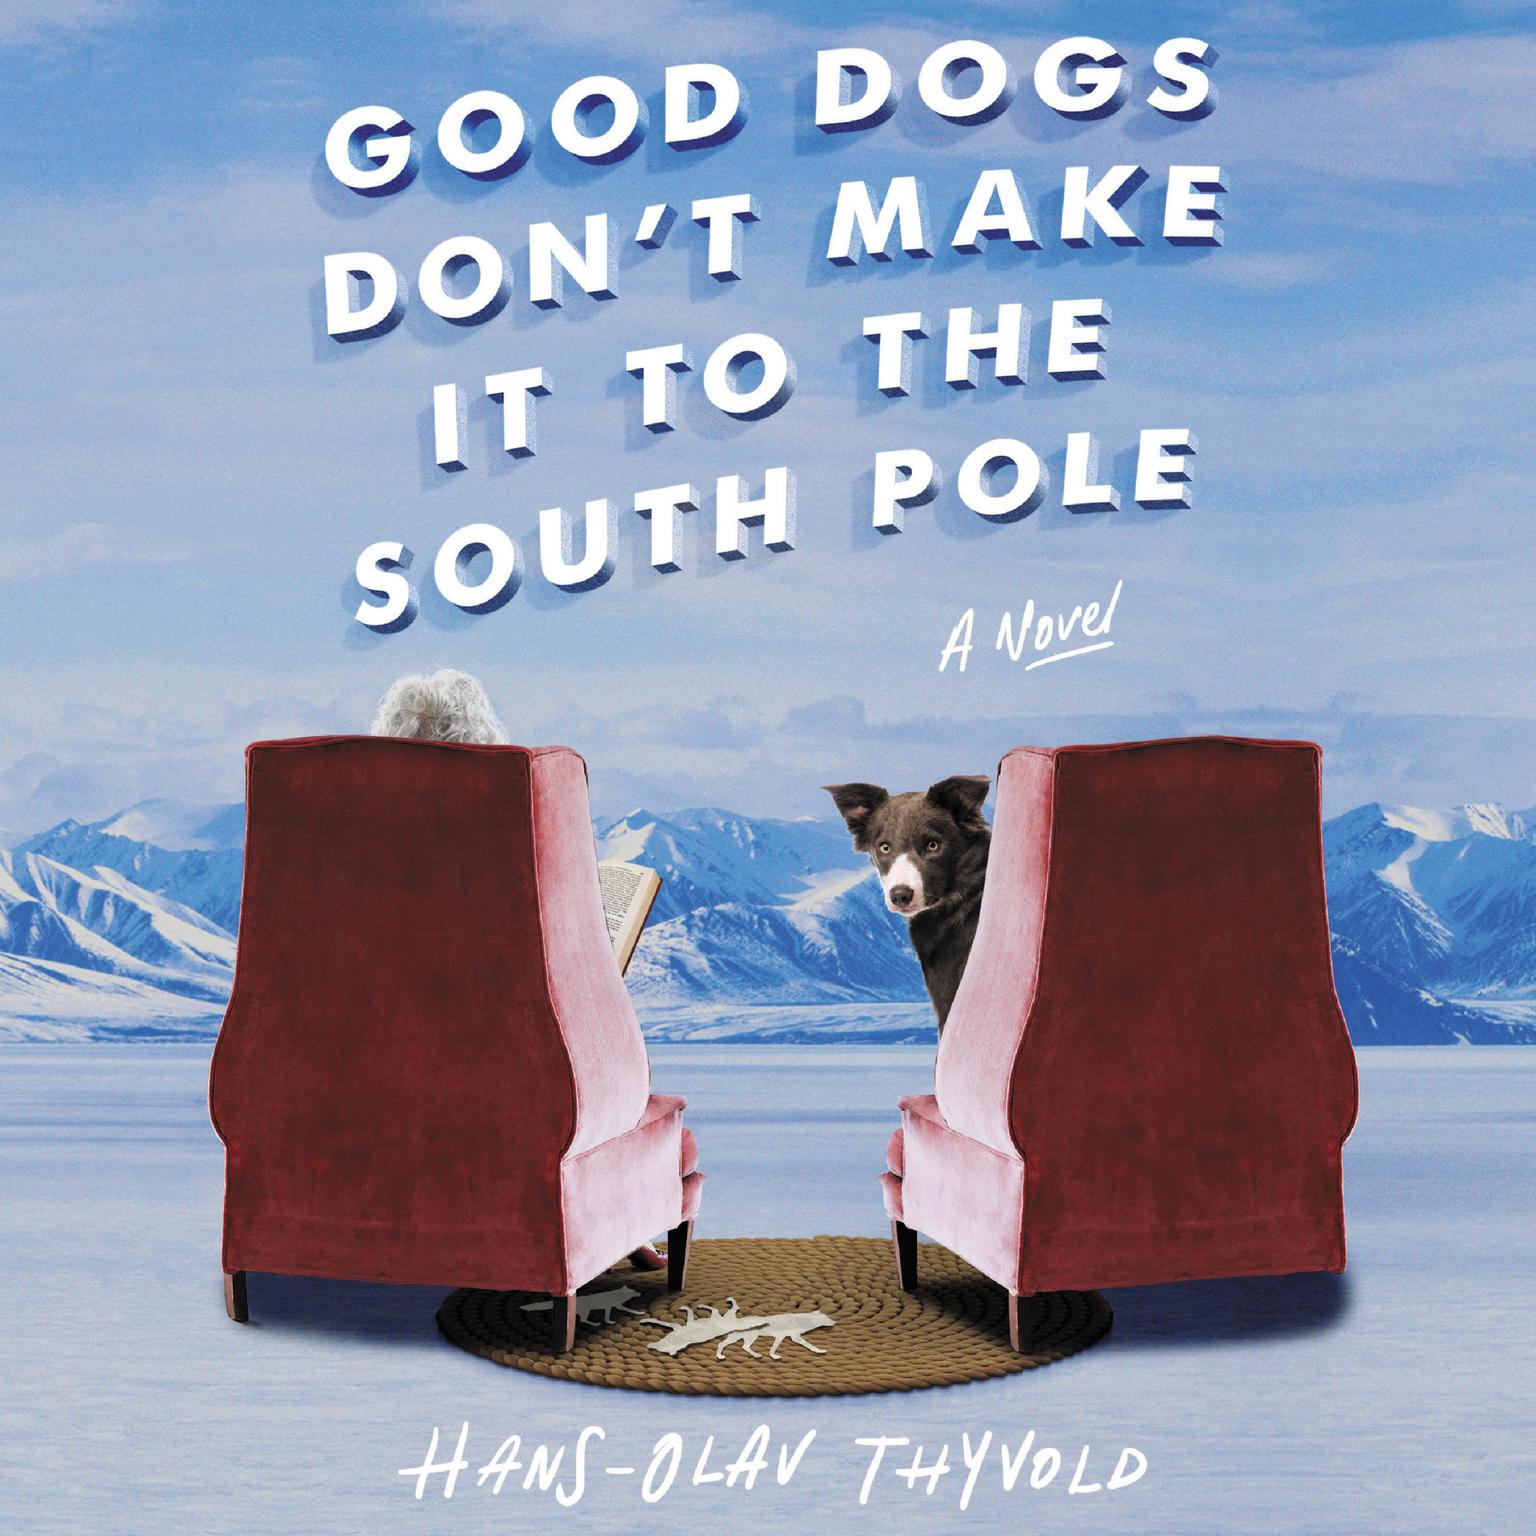 Good Dogs Dont Make It to the South Pole: A Novel Audiobook, by Hans-Olav Thyvold